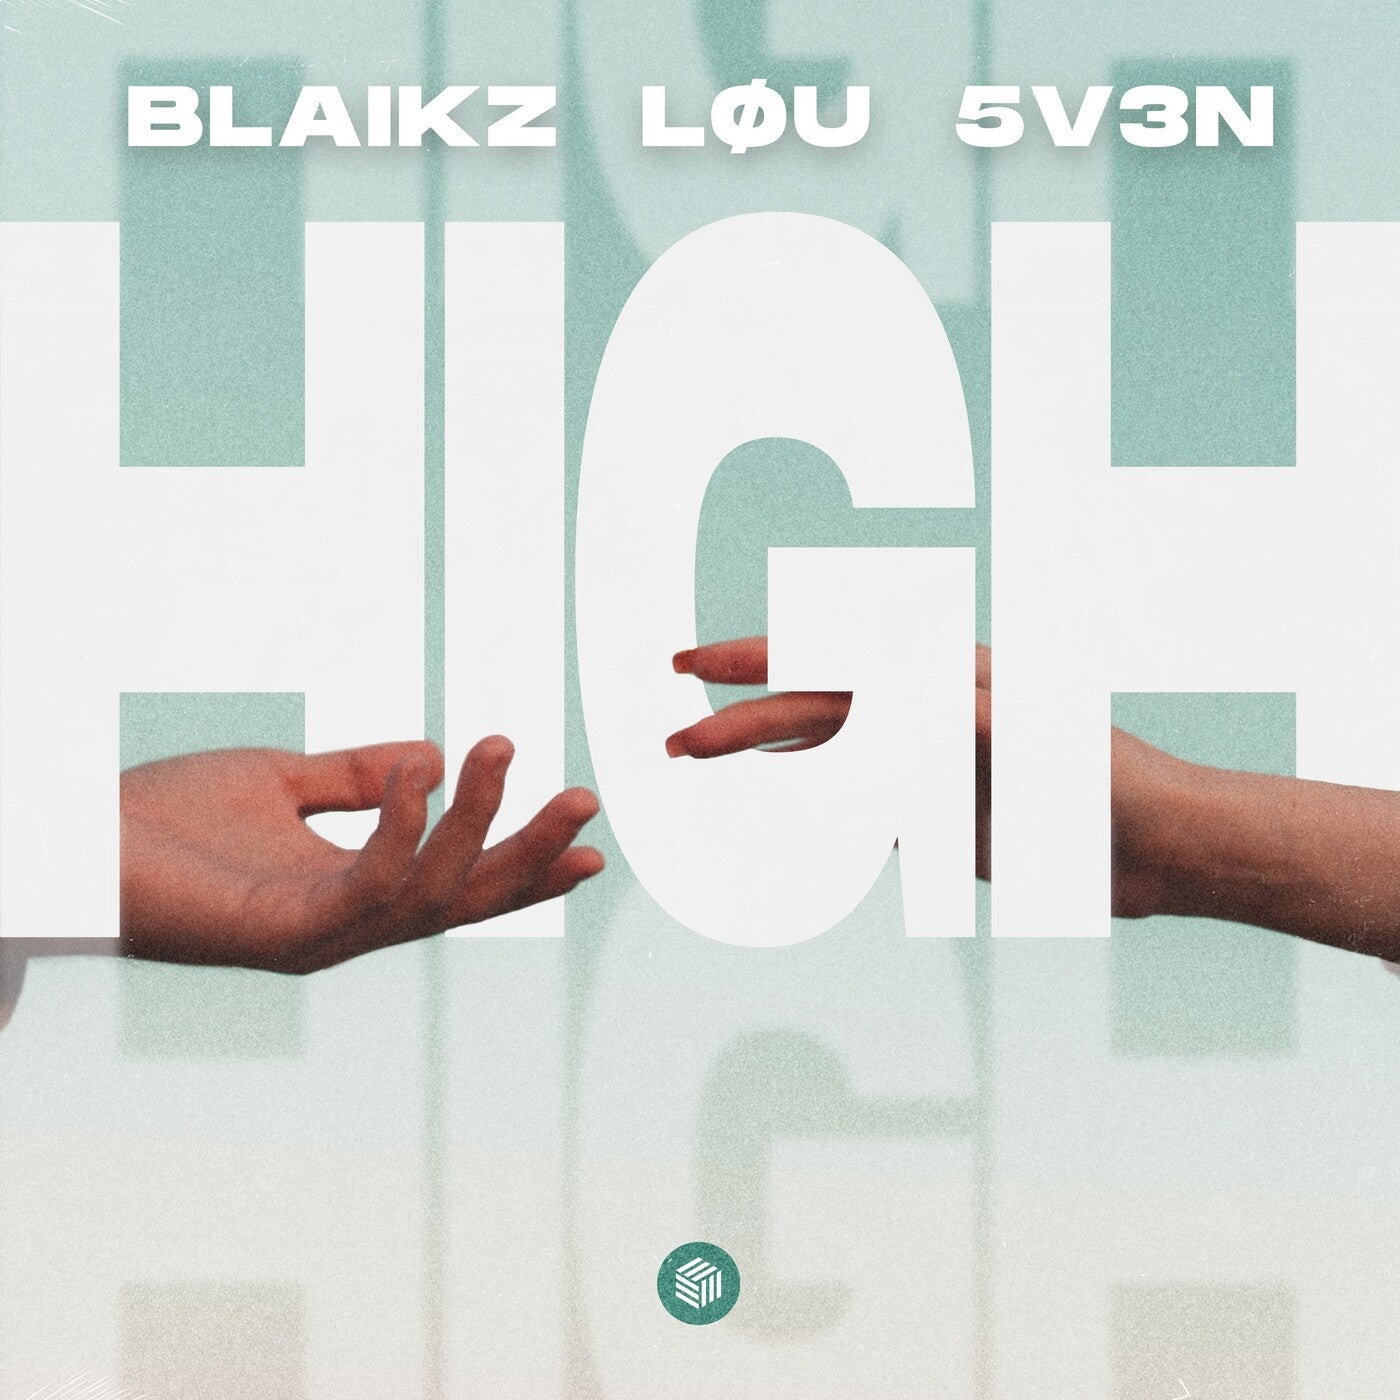 High (Extended Mix)